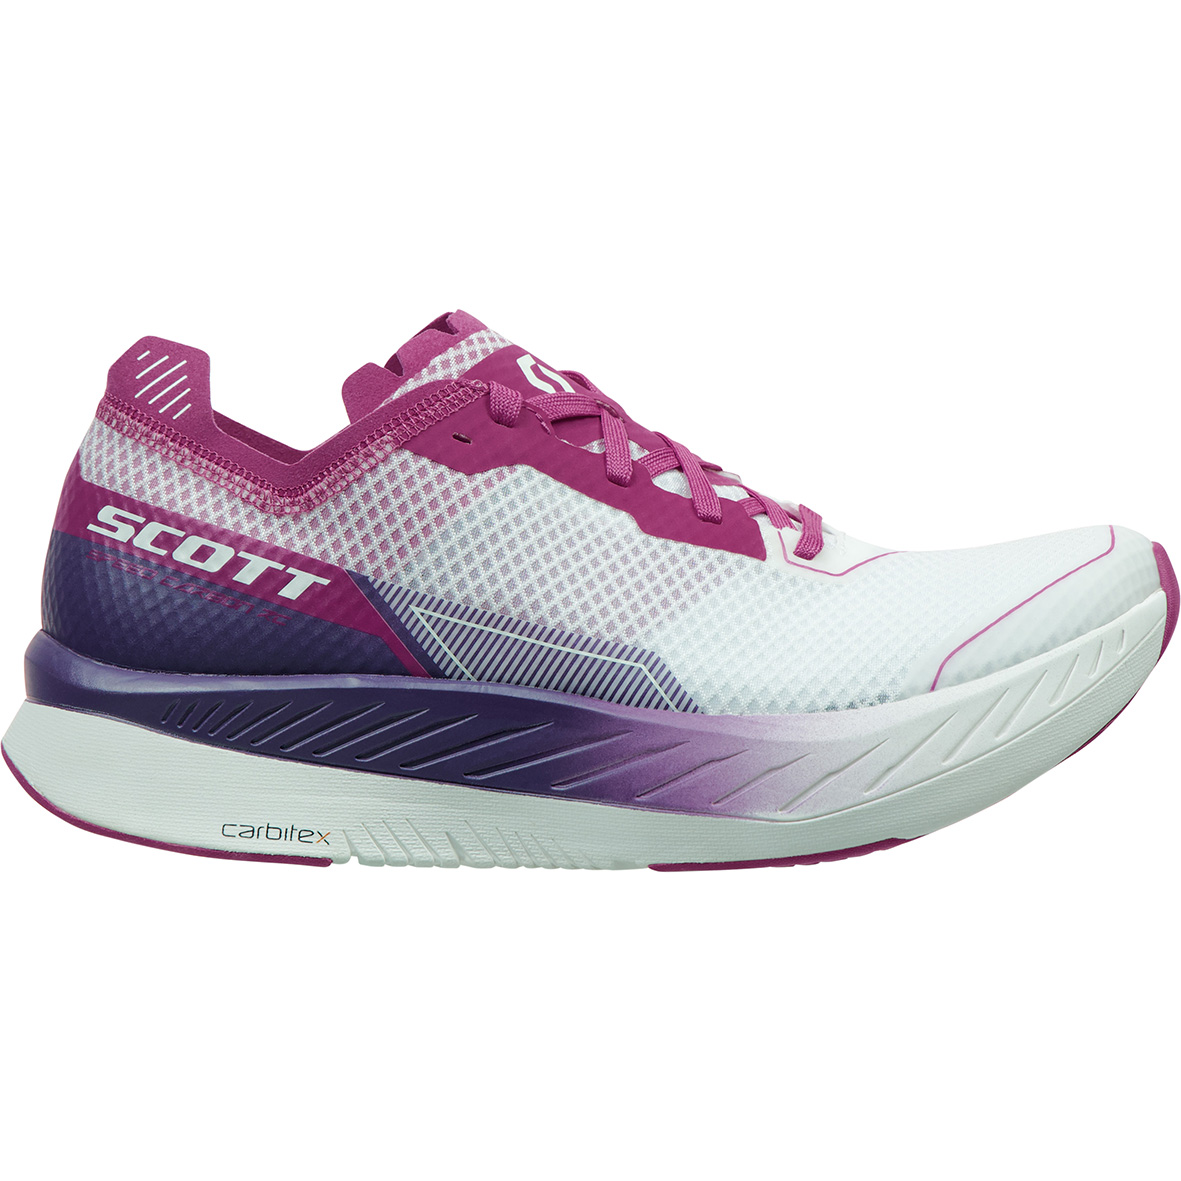 RUNNING SHOES SCOTT WS SPEED CARBON RC, WHITE-CARMINE PINK WOMAN.